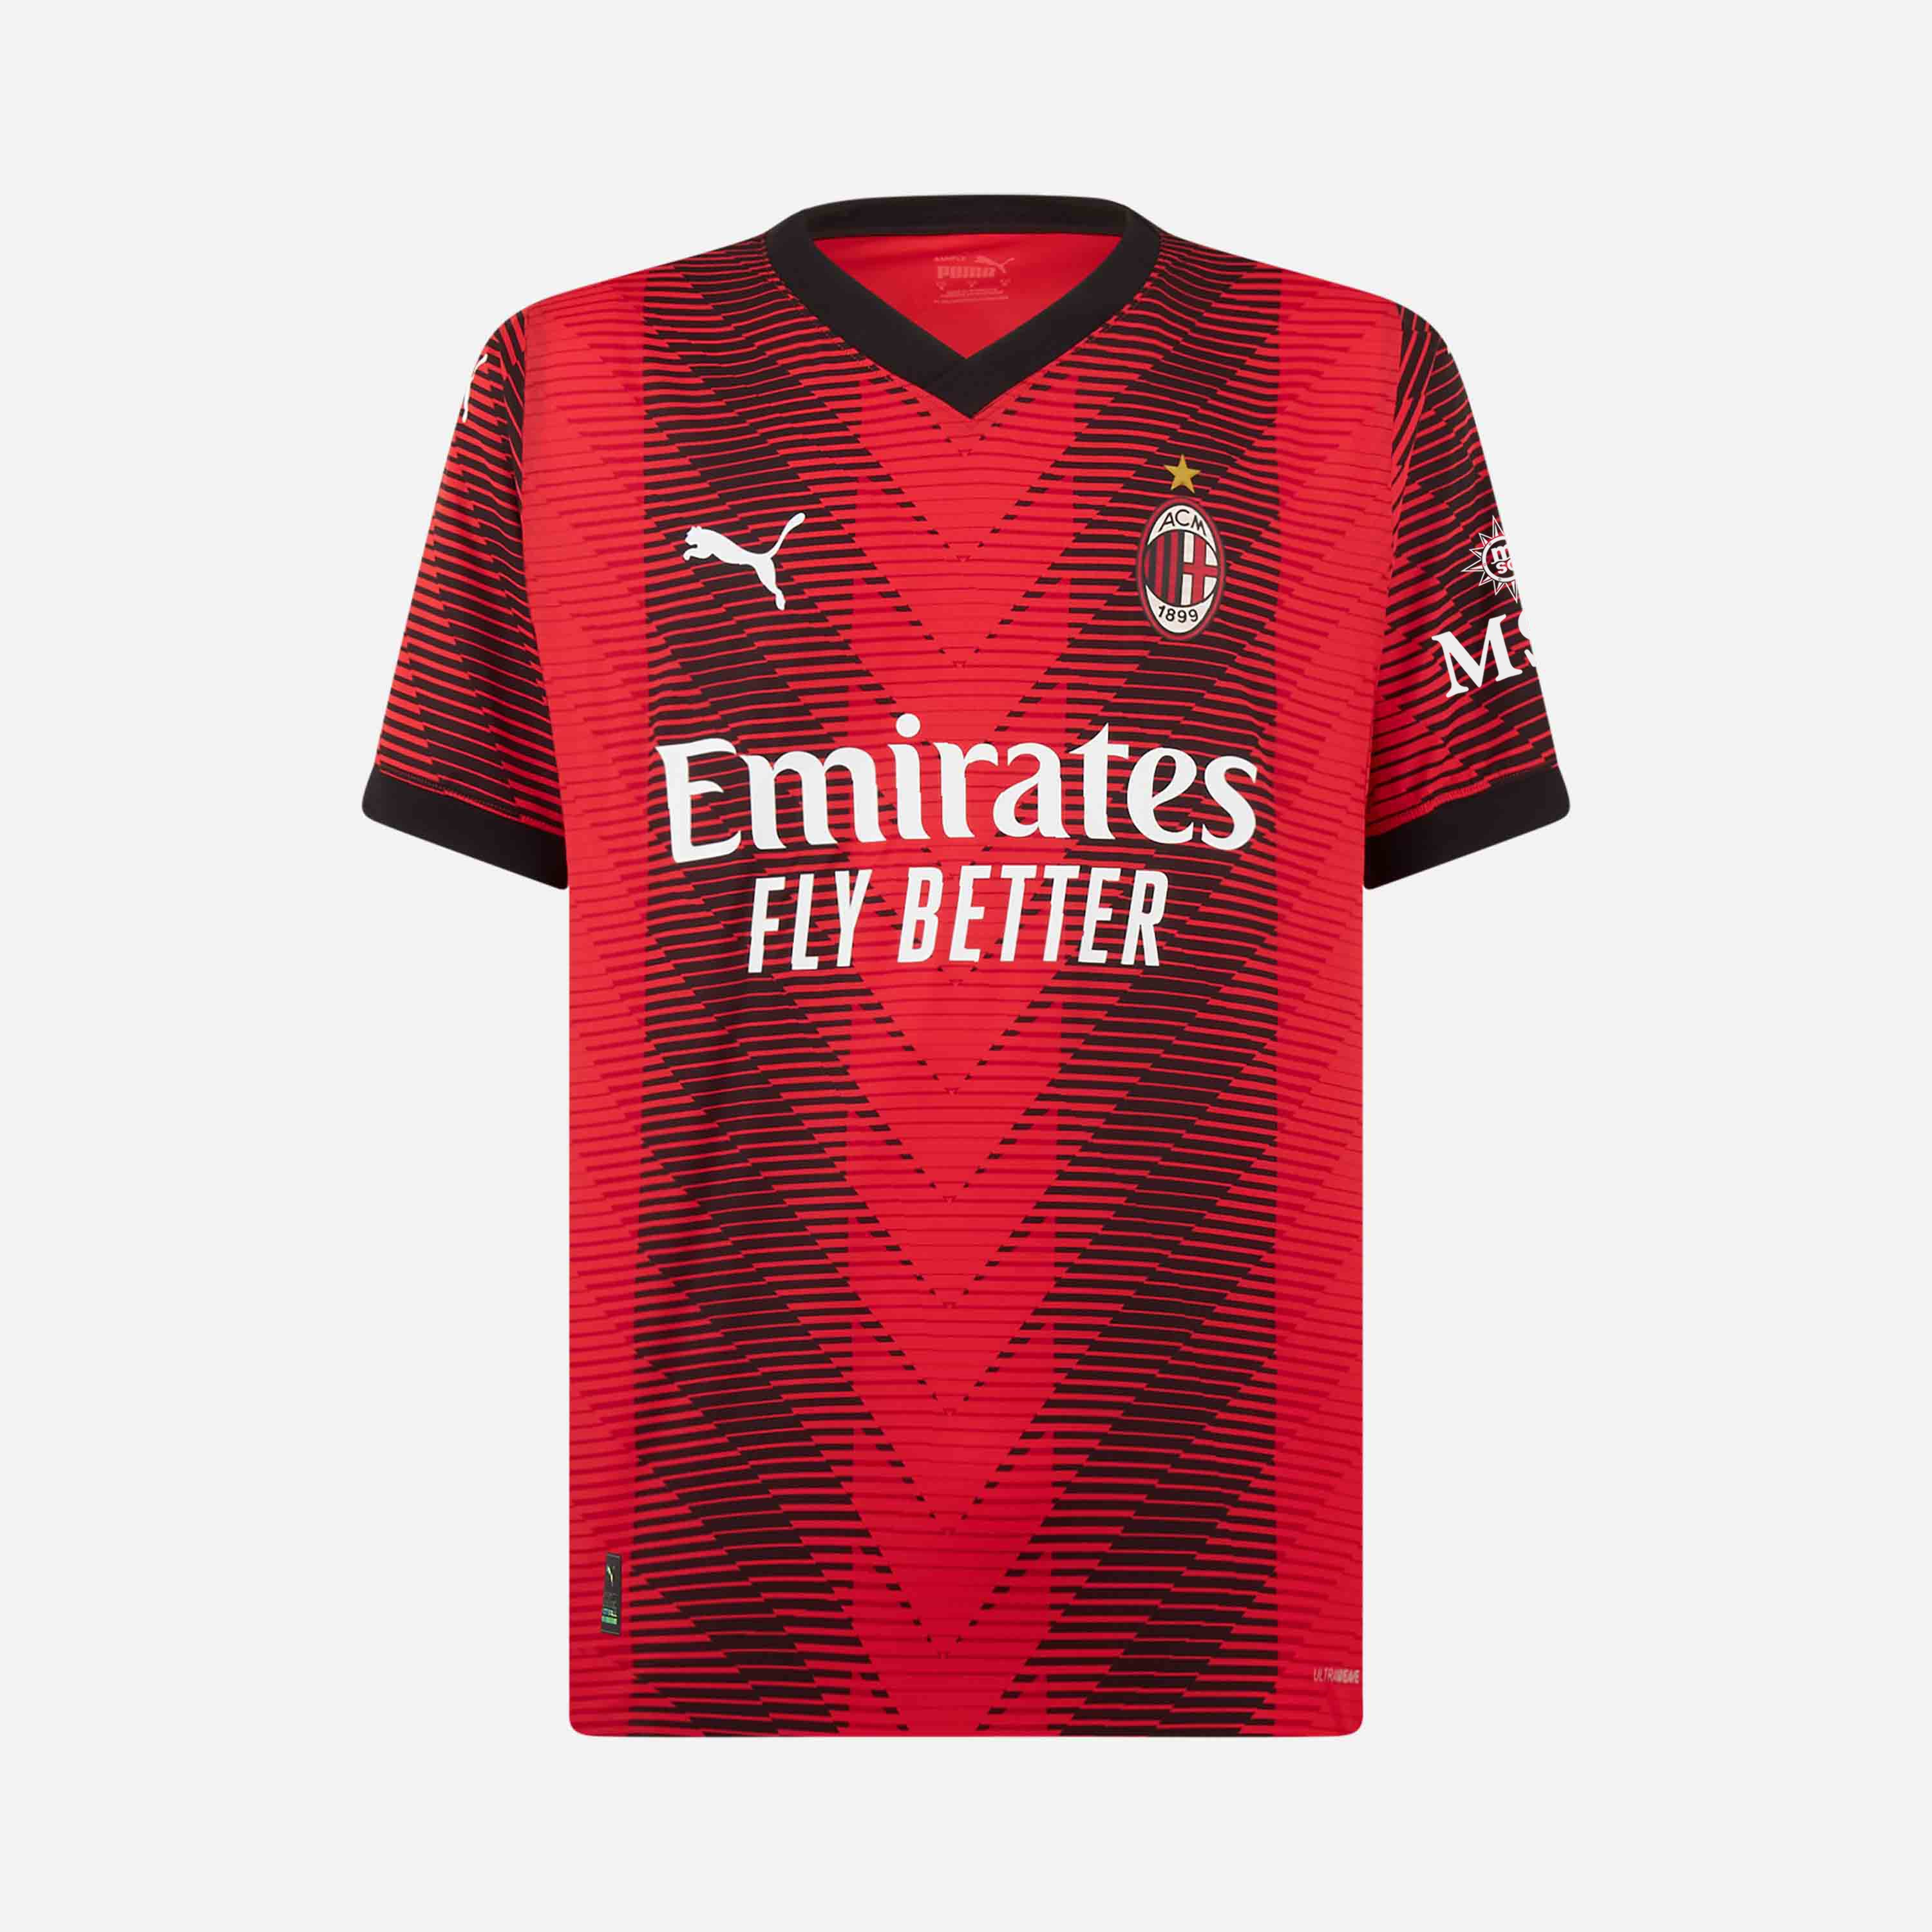 The new Off-White™ x AC Milan collection